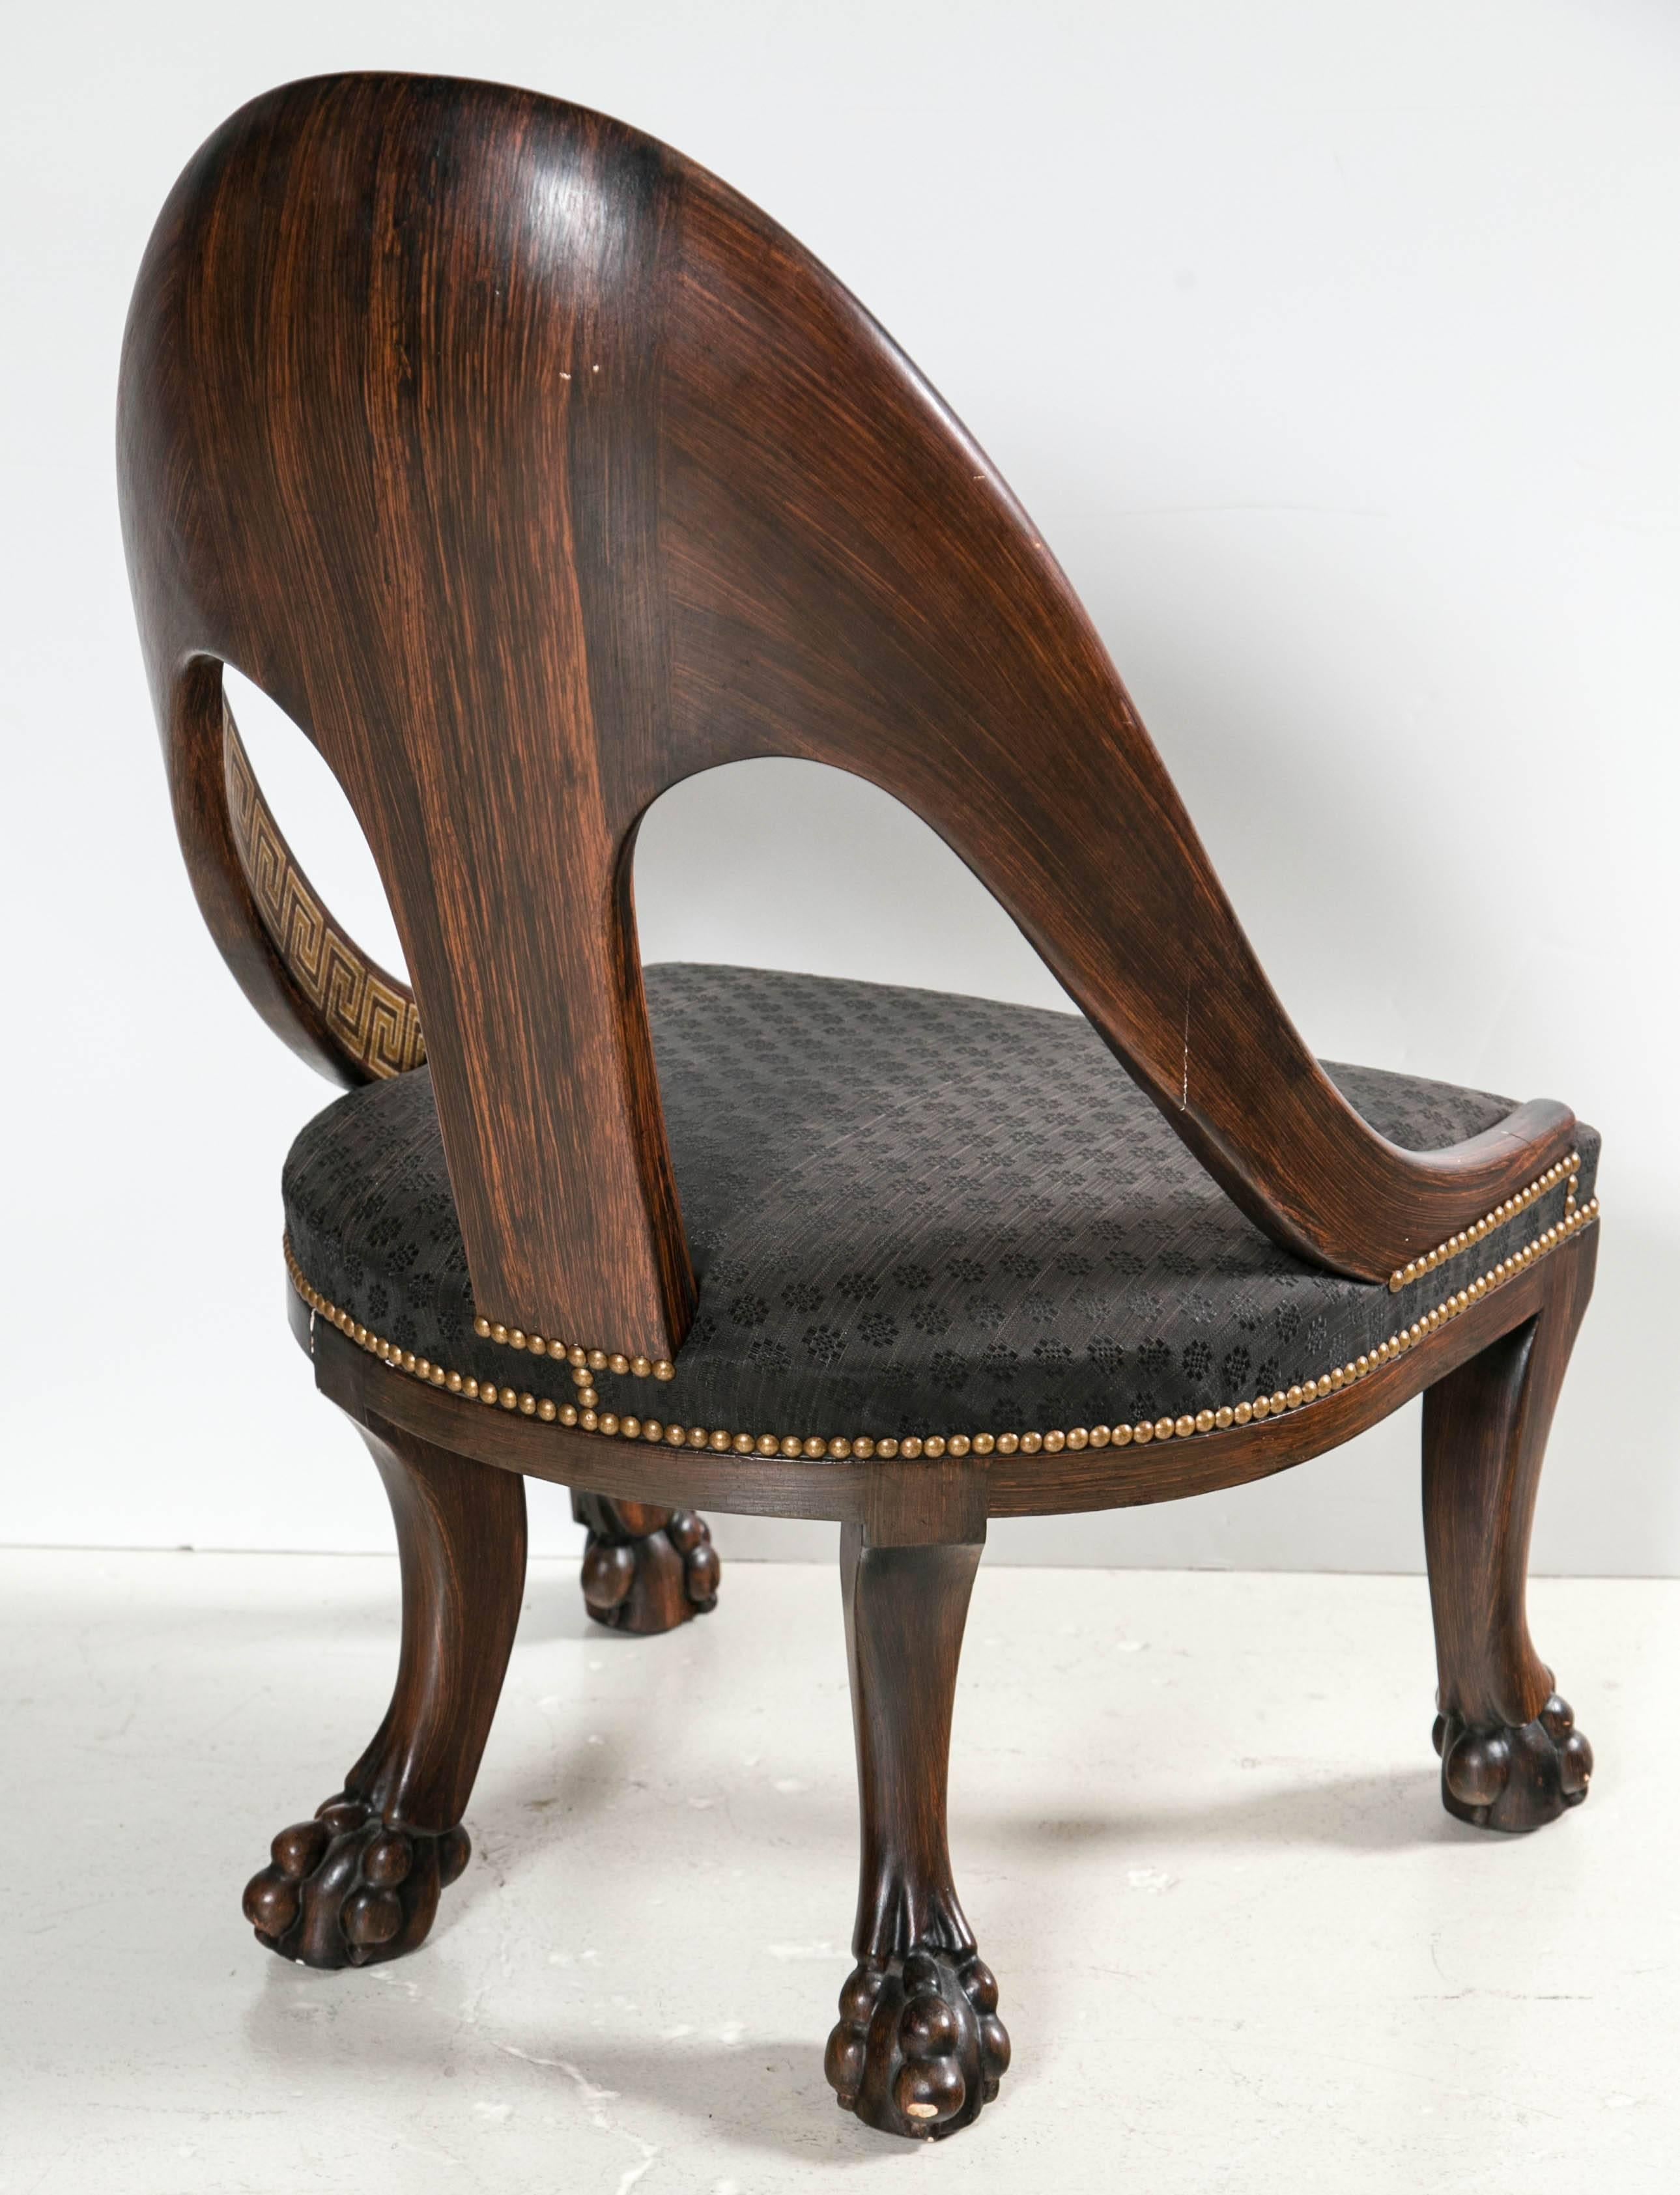 Wood Spoon-Back Chairs